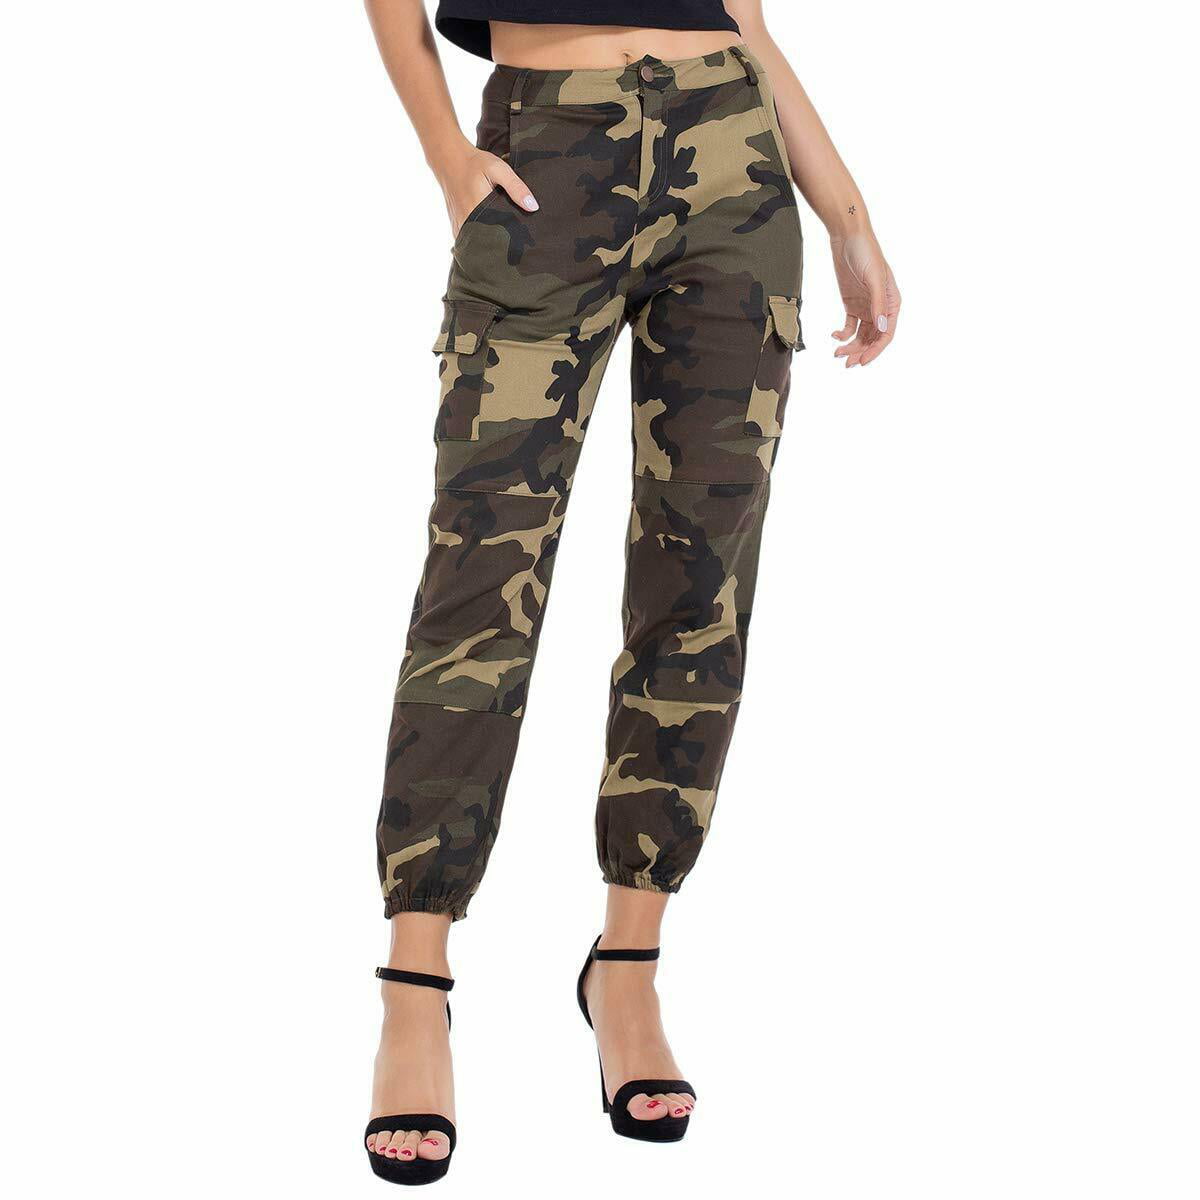 Womens Camo Cargo Trousers Casual Pants Military Army Combat Camouflage Print 